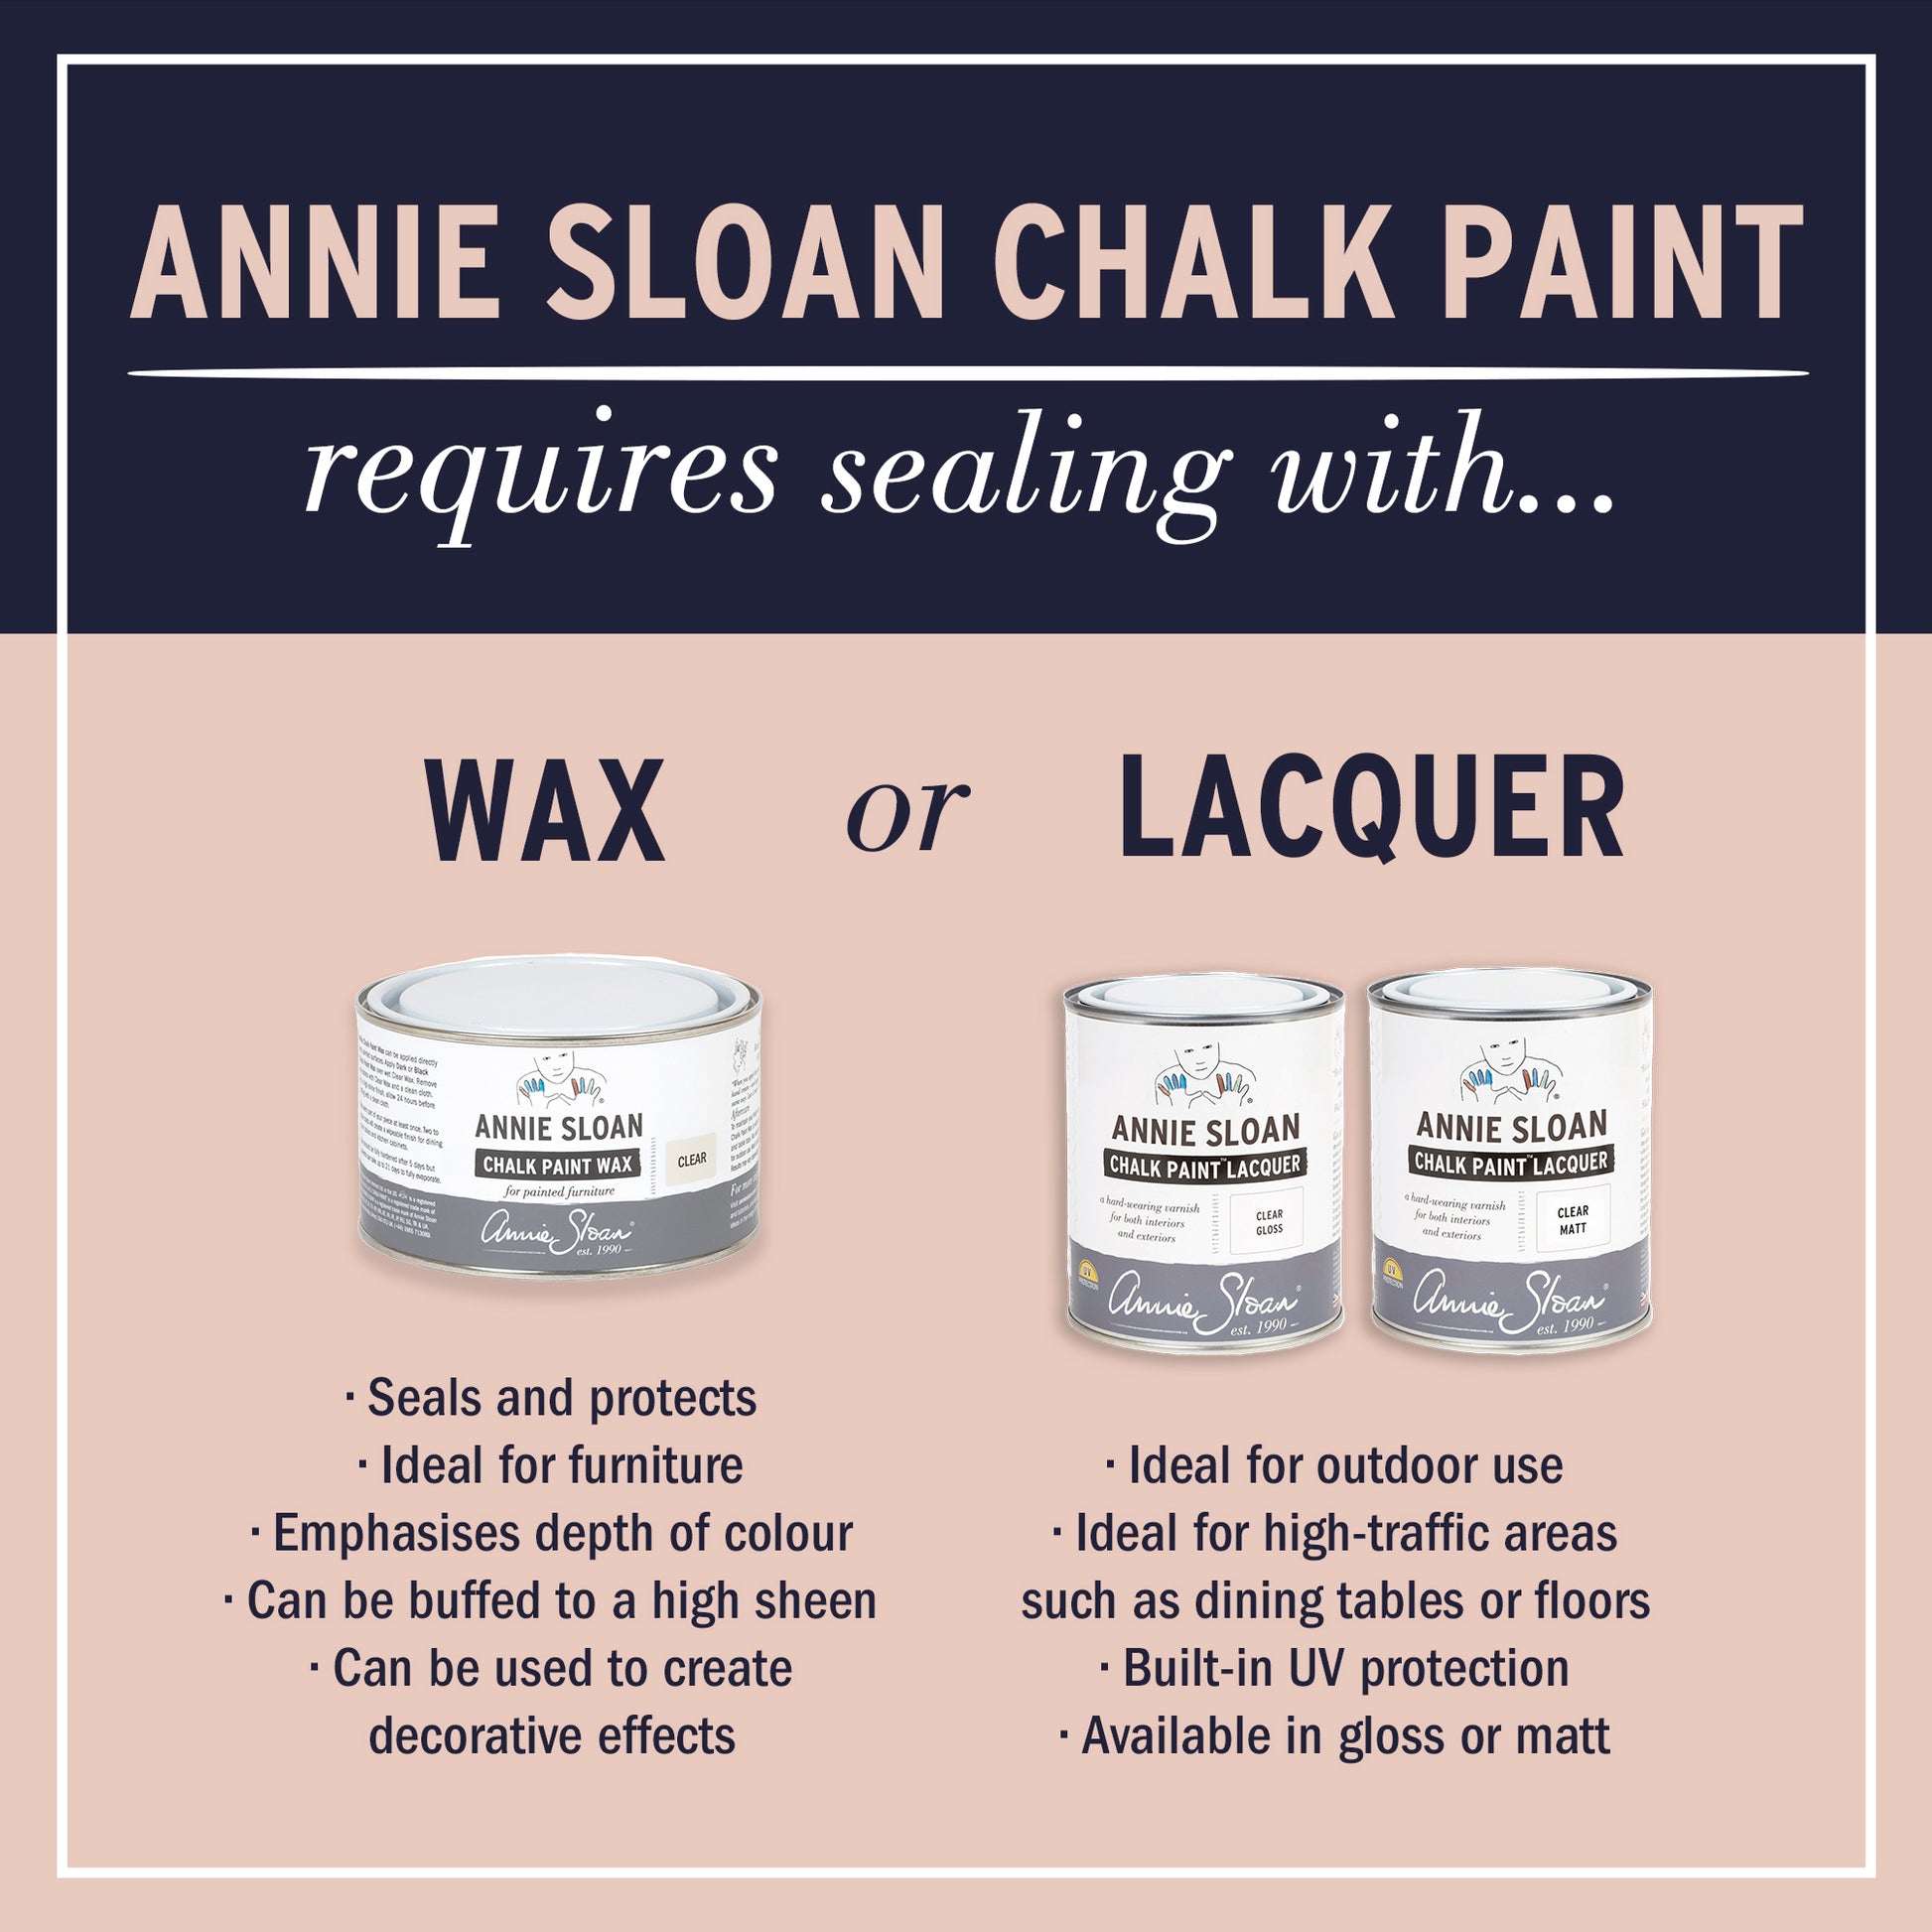 Annie Sloan Chalk Paint® - Paloma - The 3 Painted Pugs